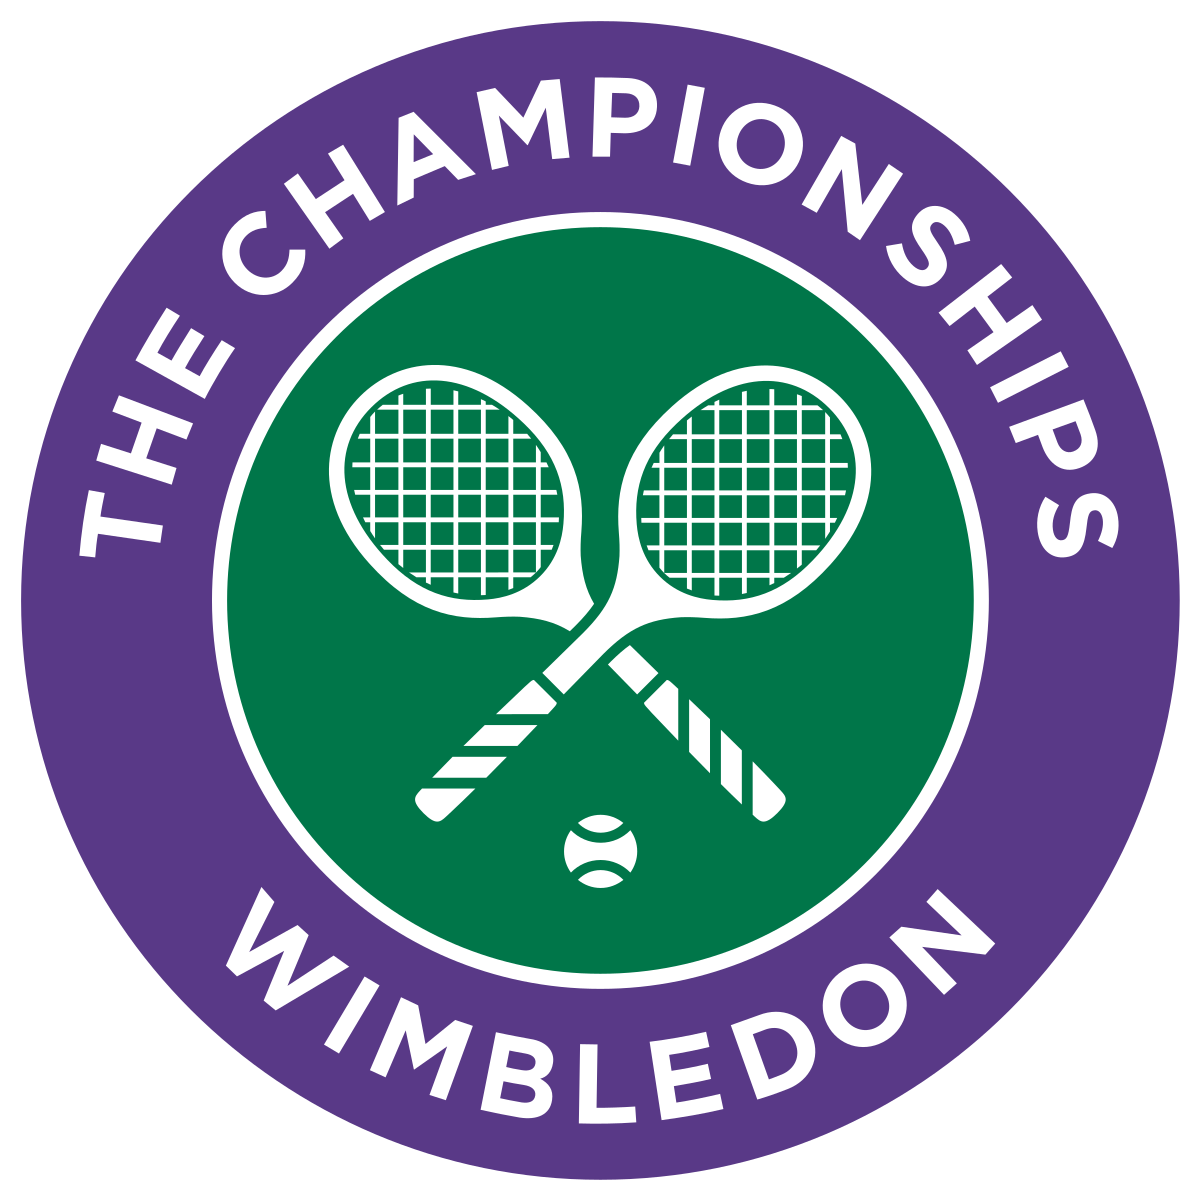 Communications Manager Wimbledon iSportConnect